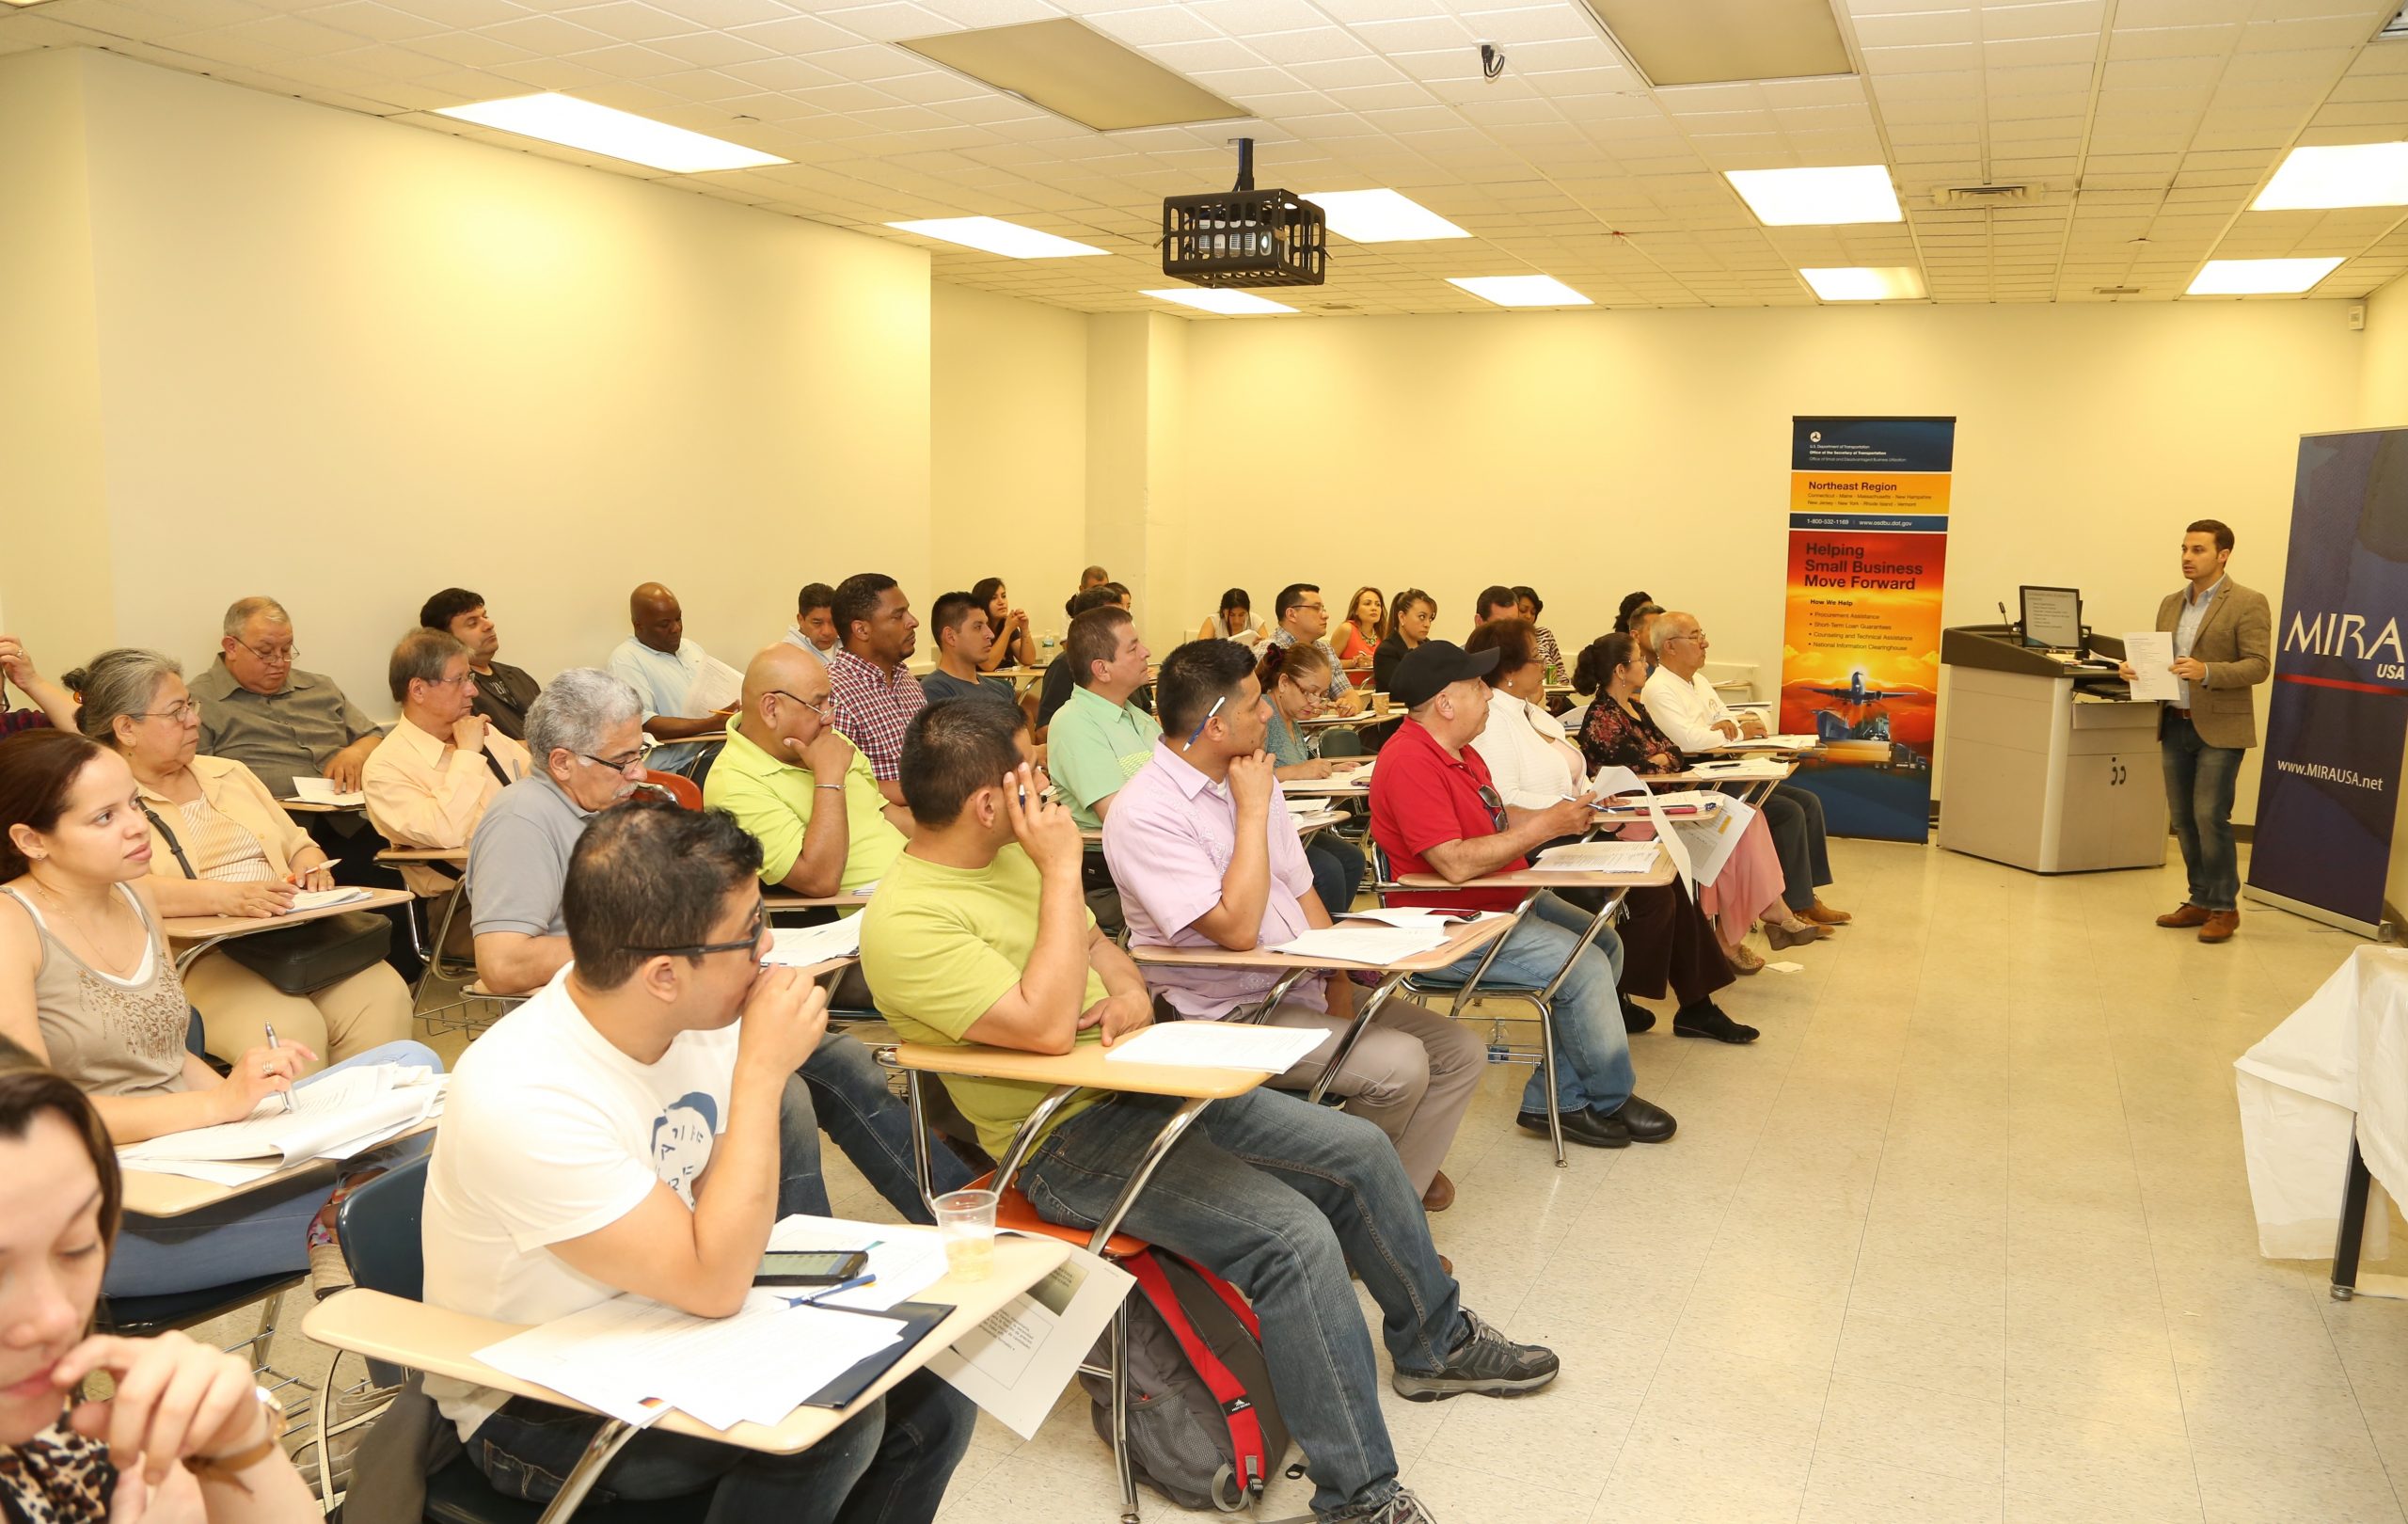 MIRA USA conducted its first "Training for Small Contractors and Construction Companies" in the city of New York